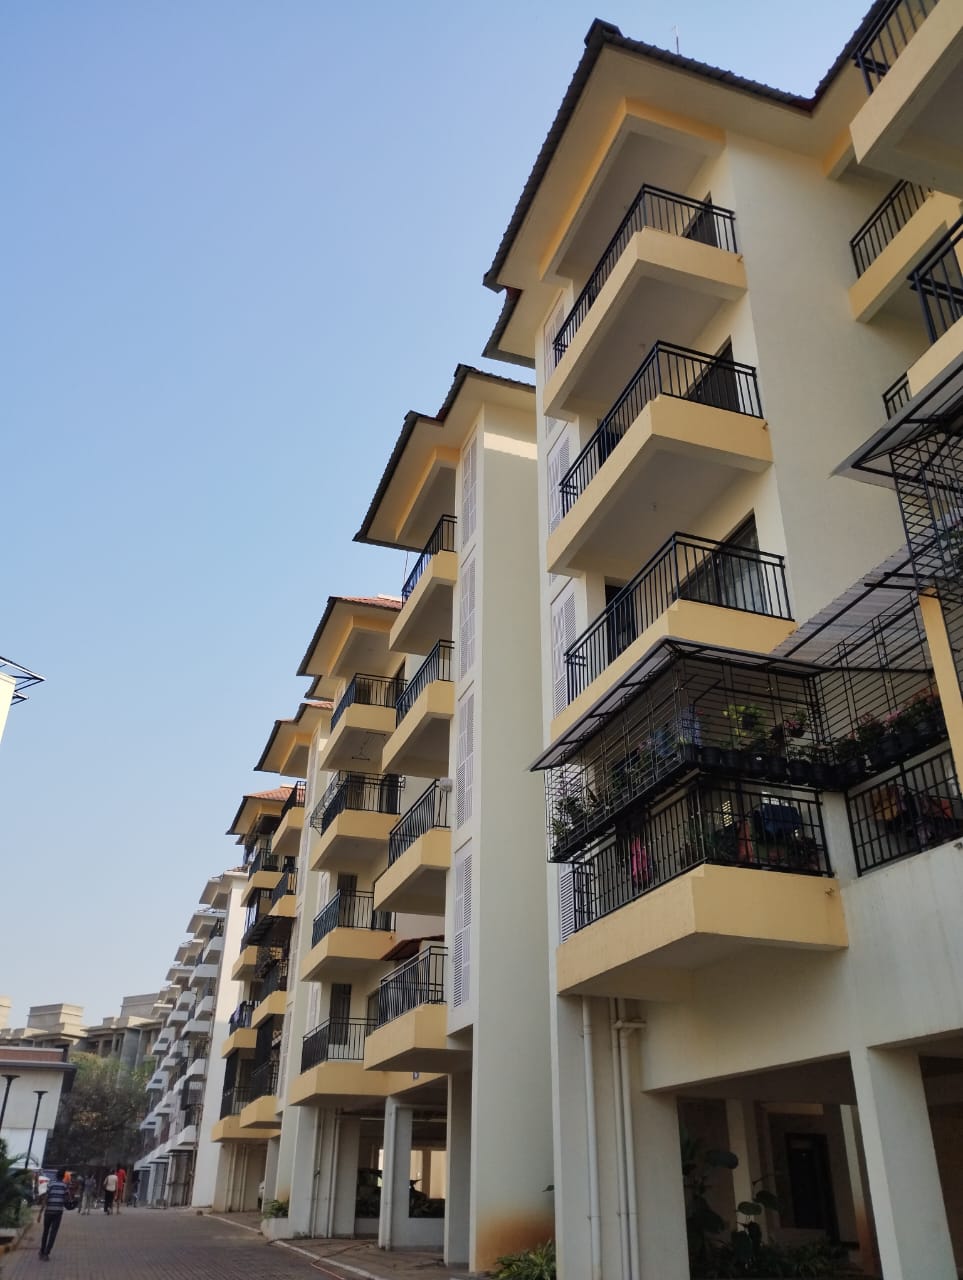 2BHK luxurious Apartment for sale in Goa